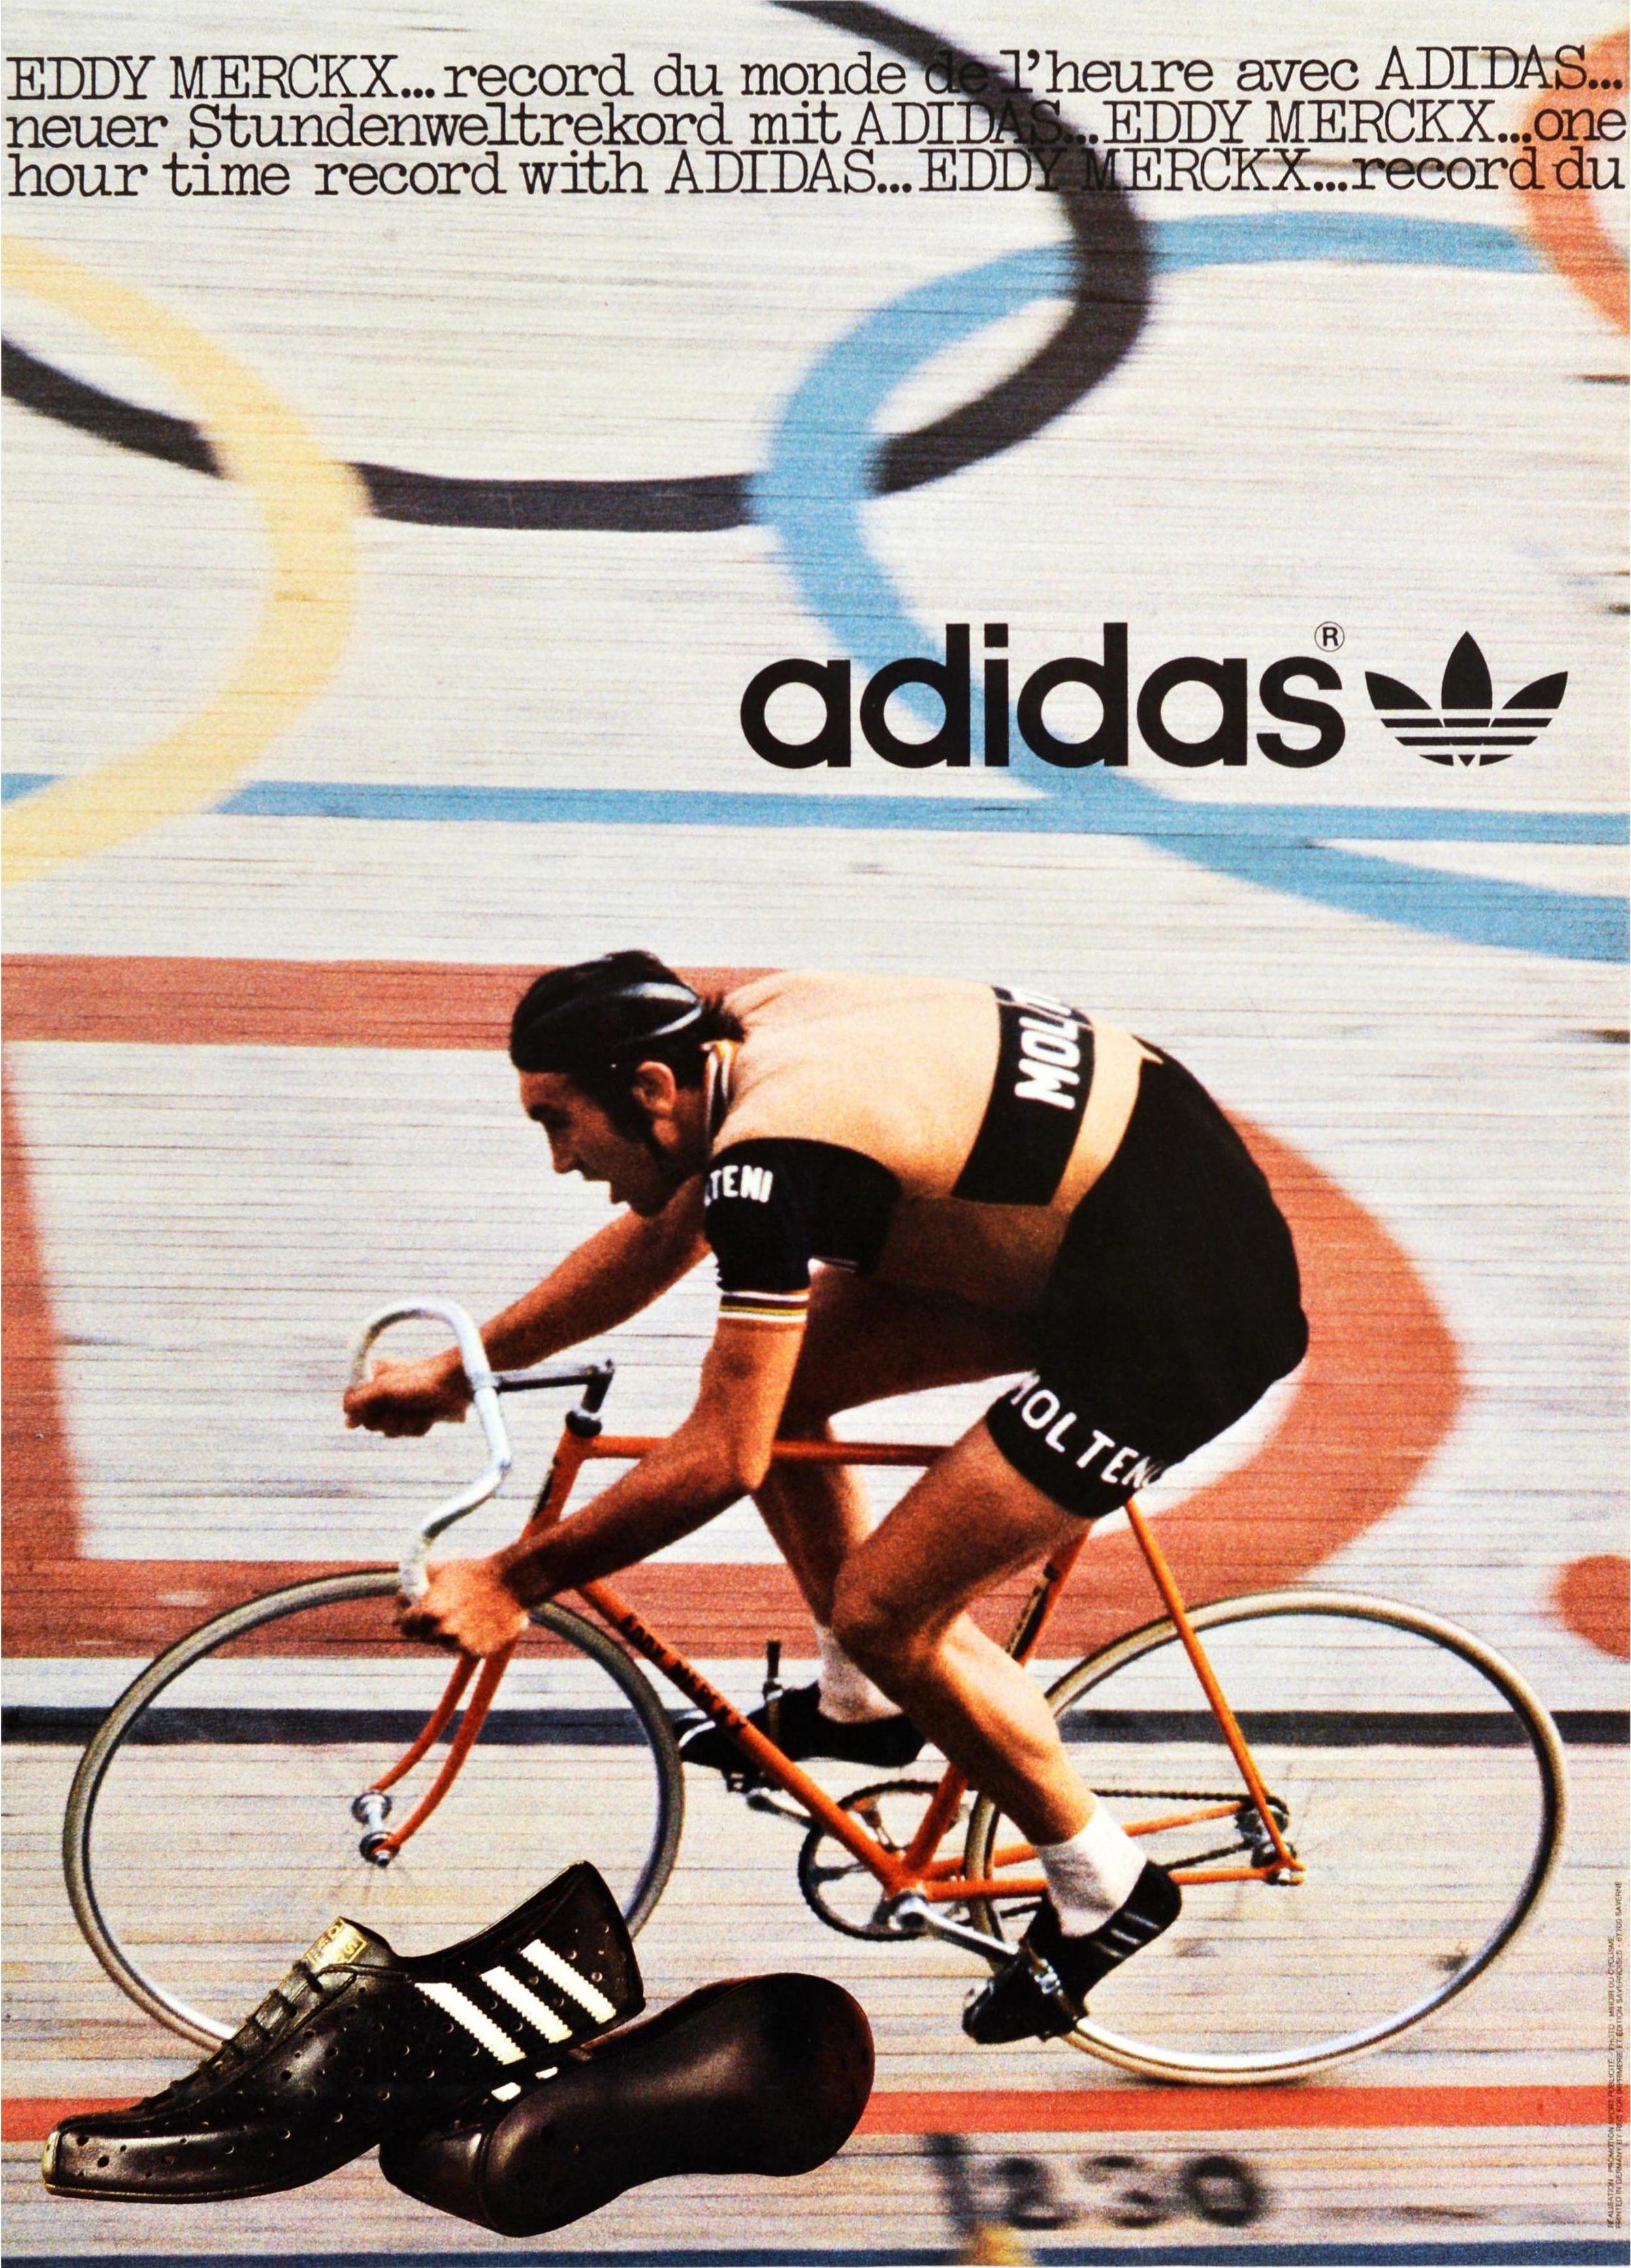 Unknown - Original Vintage Poster Adidas Sport Shoes Eddy Merckx World  Record Cyclist Race at 1stDibs | vintage adidas poster, eddy merckx poster,  adidas vintage poster